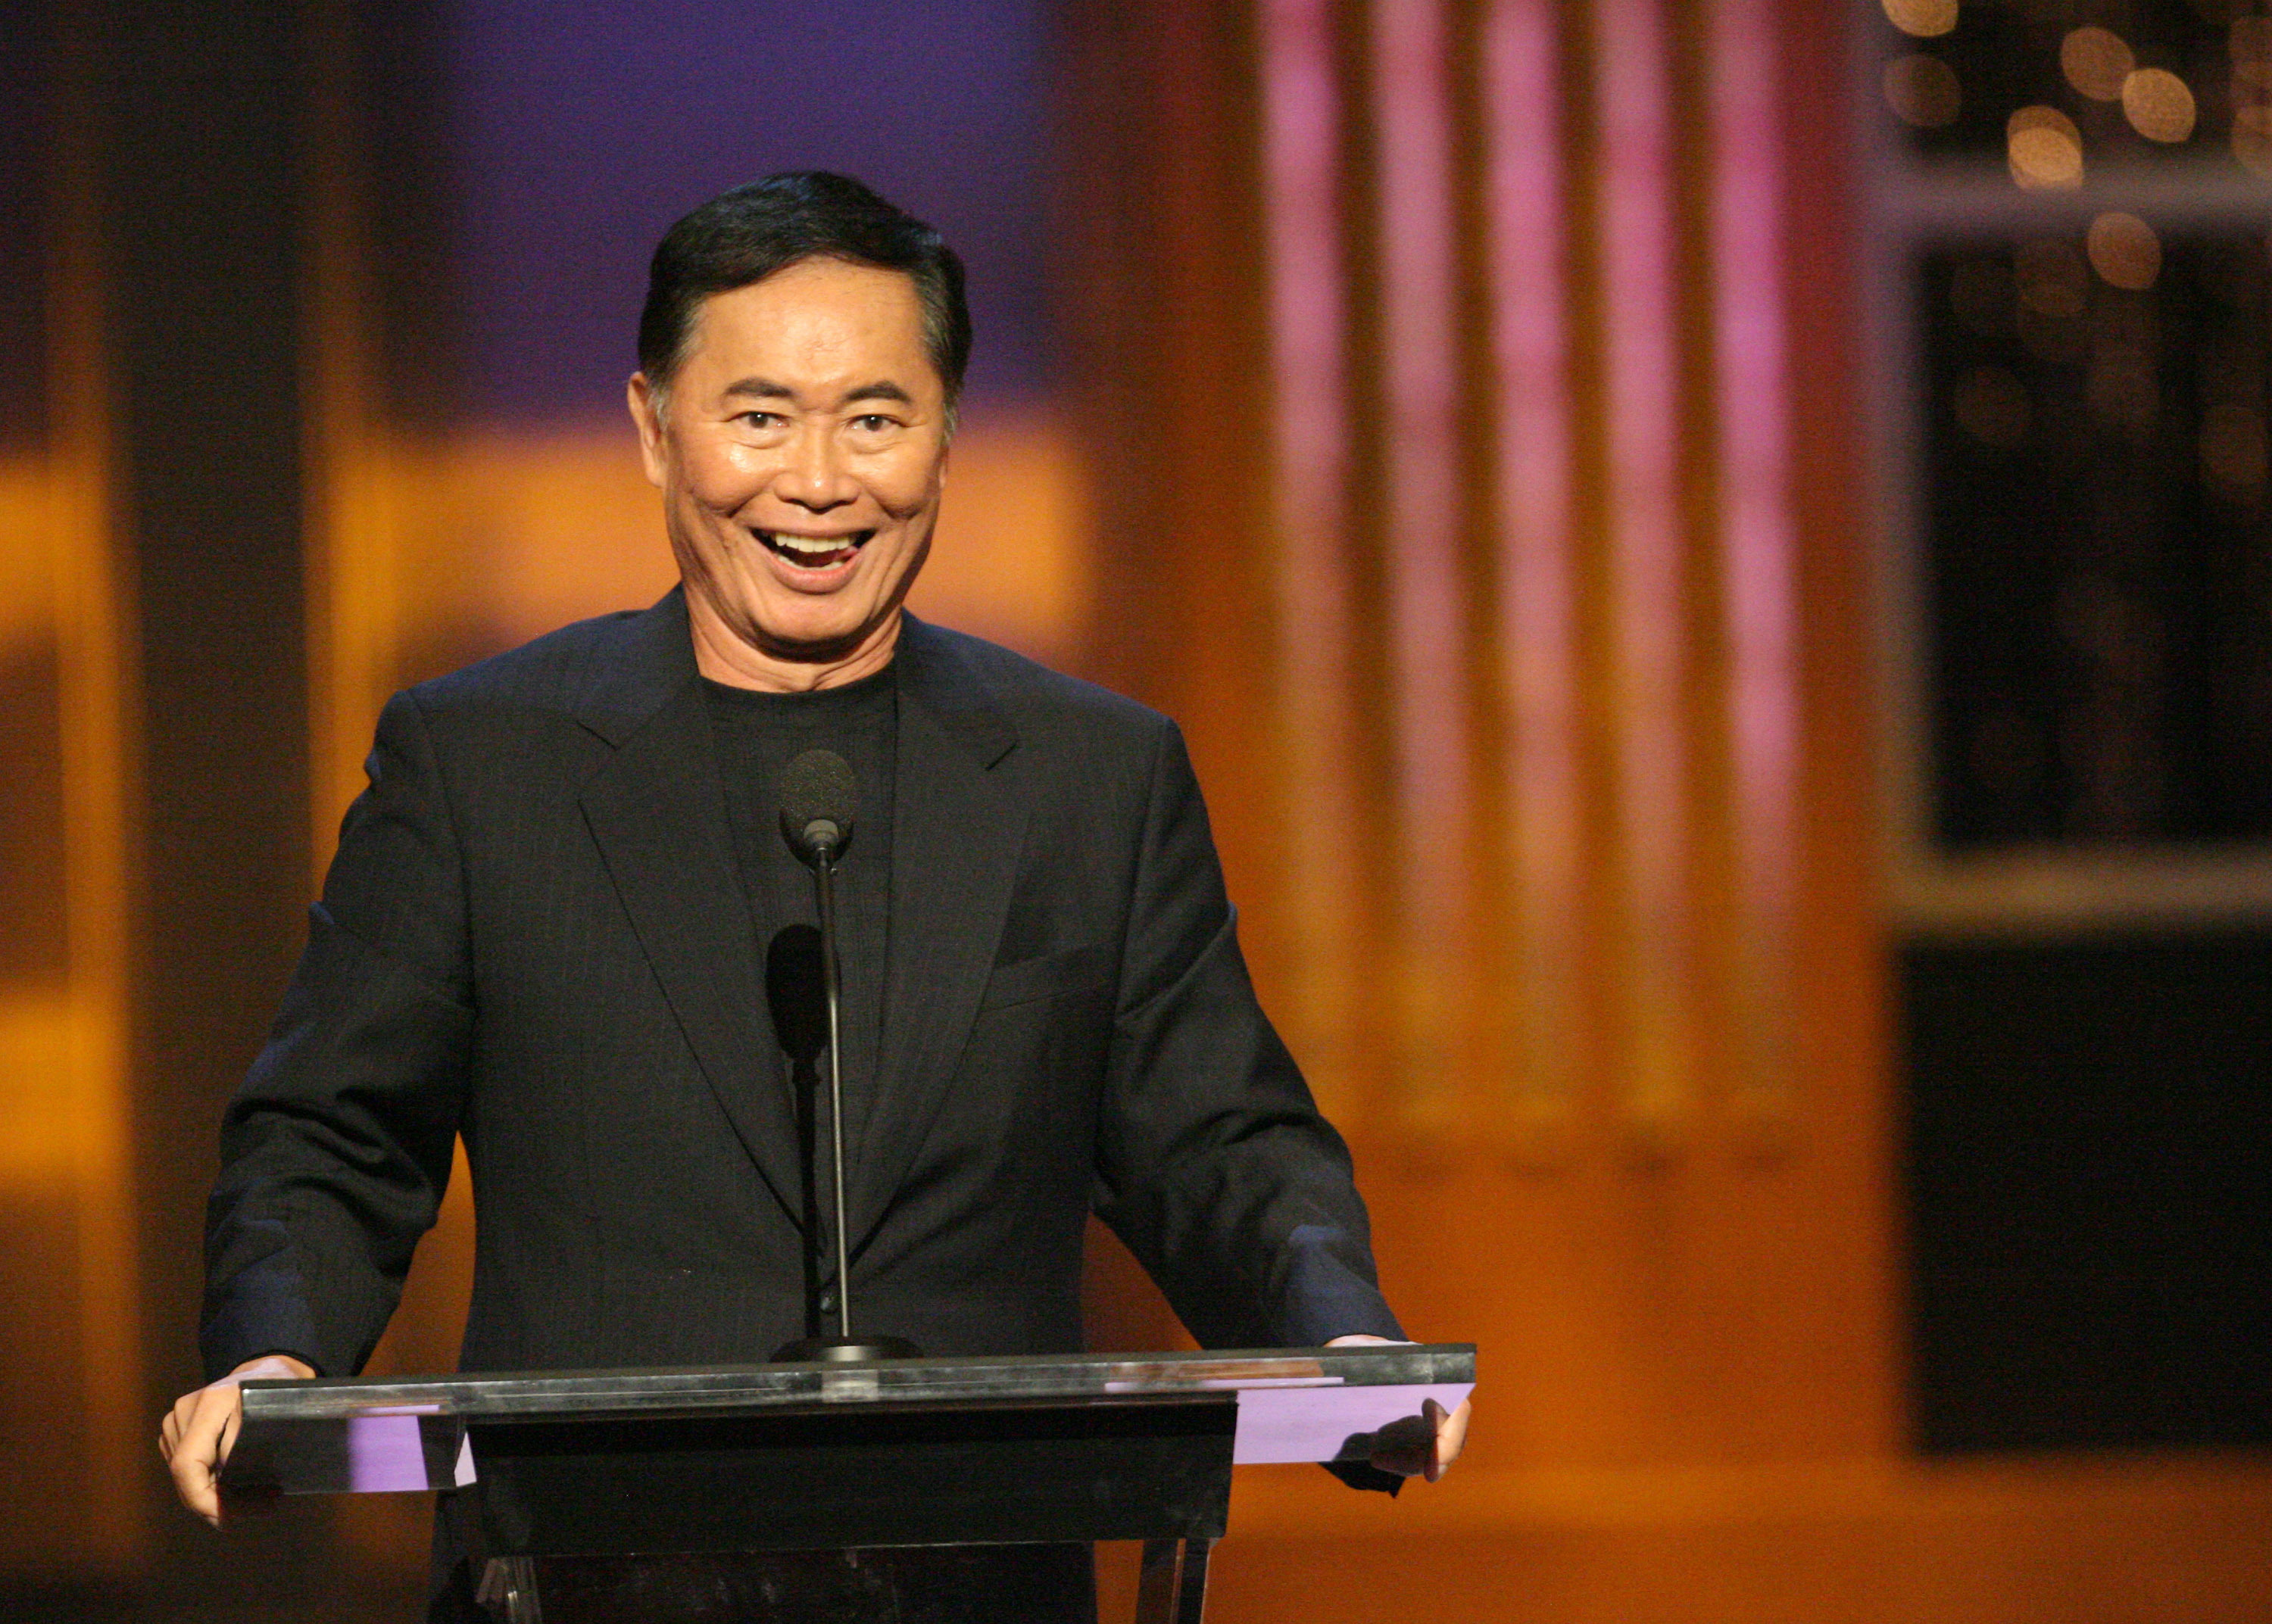 <p>Another aging-celebrity-turned-internet comedy legend was born at the Shatner roast, when George Takei took the stage to roast his not-exactly-friend Shatner. He led with, "My name is George Takei, not Takai, like you've insisted on pronouncing it for the last 40 years! Remember: Takei, like in 'toupee.'" After that, your grandmother's Facebook page was never the same.</p><p><a href='https://www.msn.com/en-us/community/channel/vid-cj9pqbr0vn9in2b6ddcd8sfgpfq6x6utp44fssrv6mc2gtybw0us'>Follow us on MSN to see more of our exclusive entertainment content.</a></p>